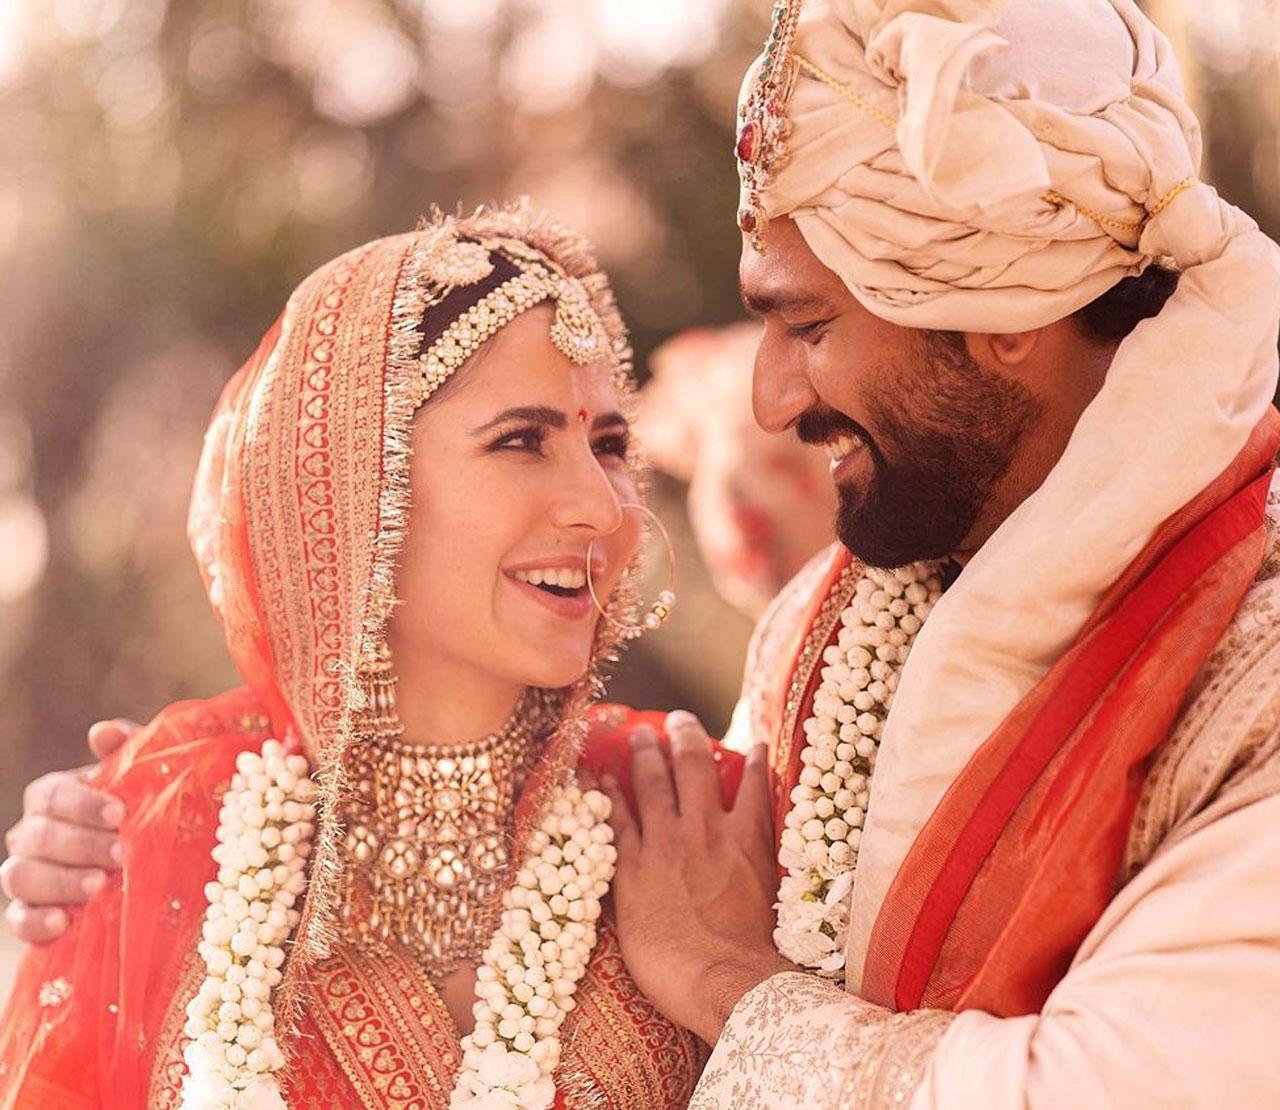 Vicky Kaushal and Katrina Kaif got married in Rajasthan on December 9 and shared some stunning and gorgeous pictures with fans from their wedding. Their wedding outfits were designed by celebrity fashion designer Sabyasachi Mukherjee and he gave out the details of the same.